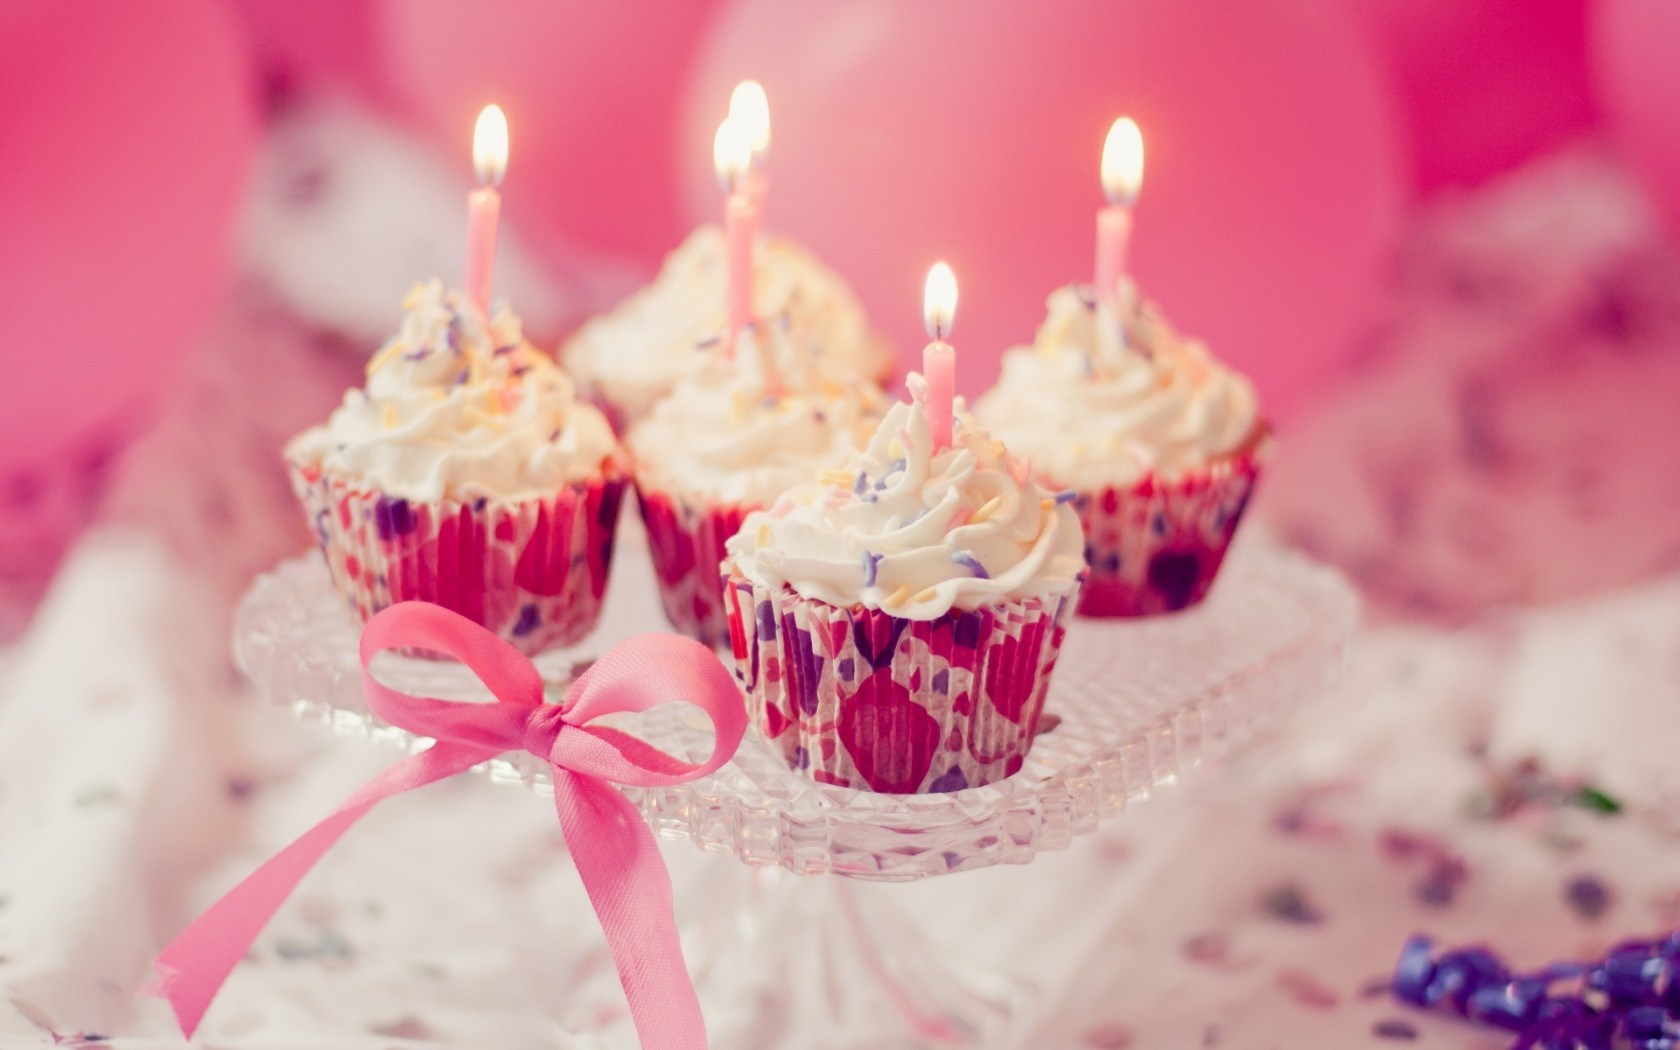 WALLPAPER HD Candles Holiday Cream Sweet Cupcakes Pink Hd W